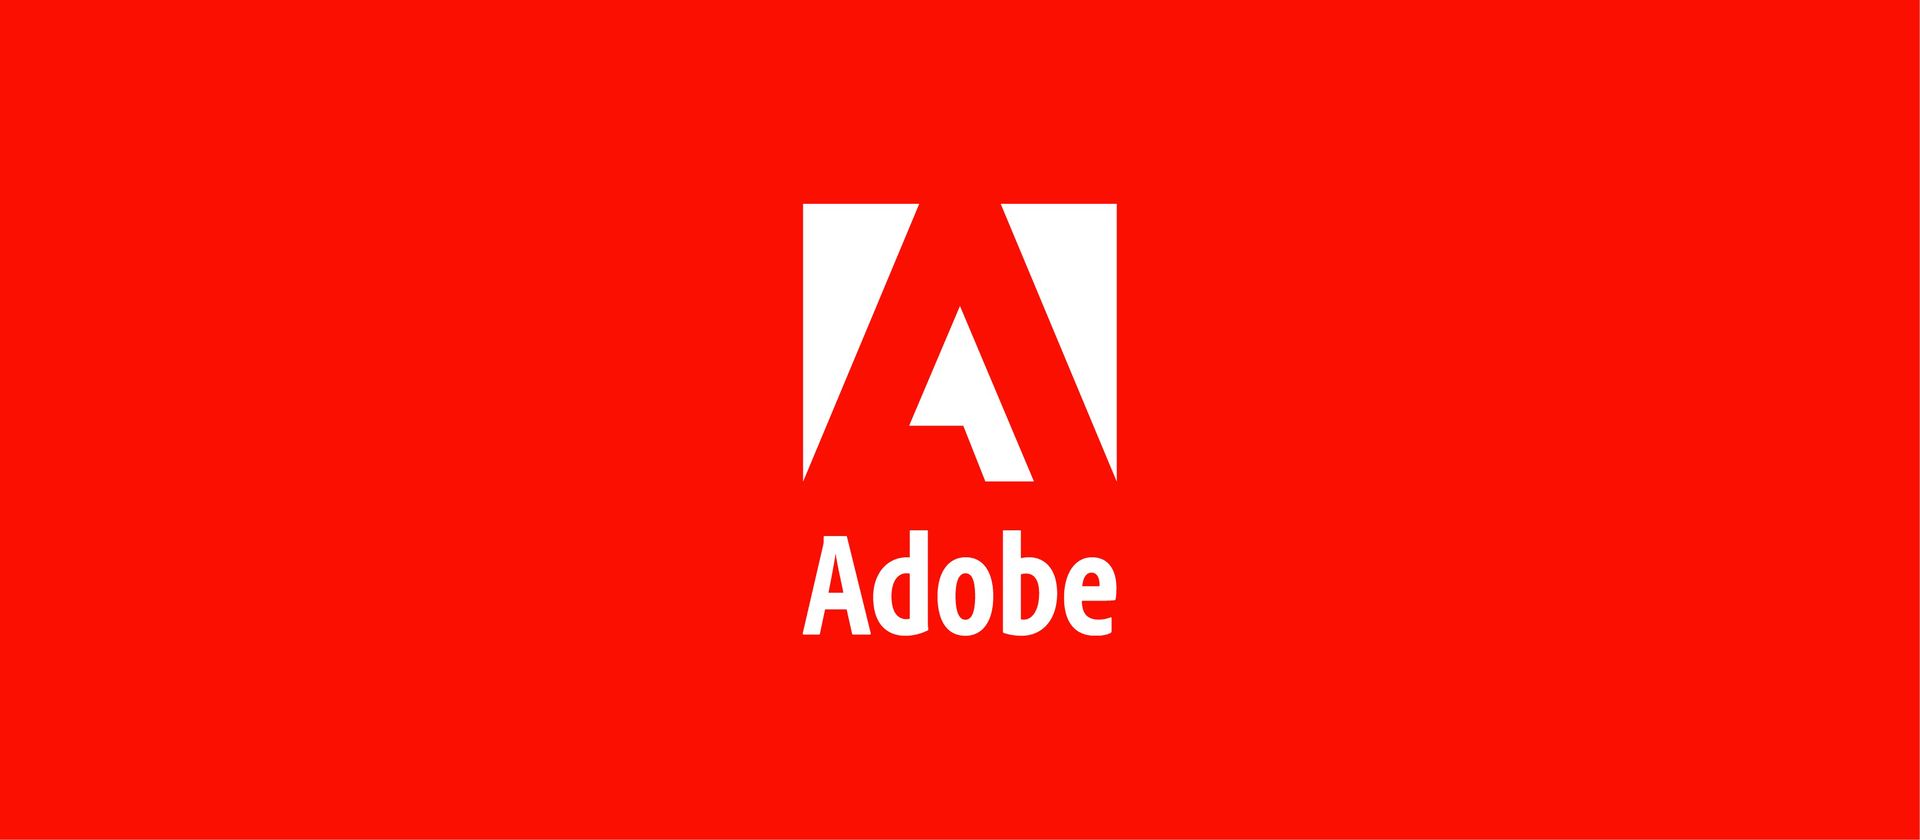 In this article, we are going to be covering shares of Adobe dropping by 17% after Adobe buys Figma, a design software firm that is a competitor.